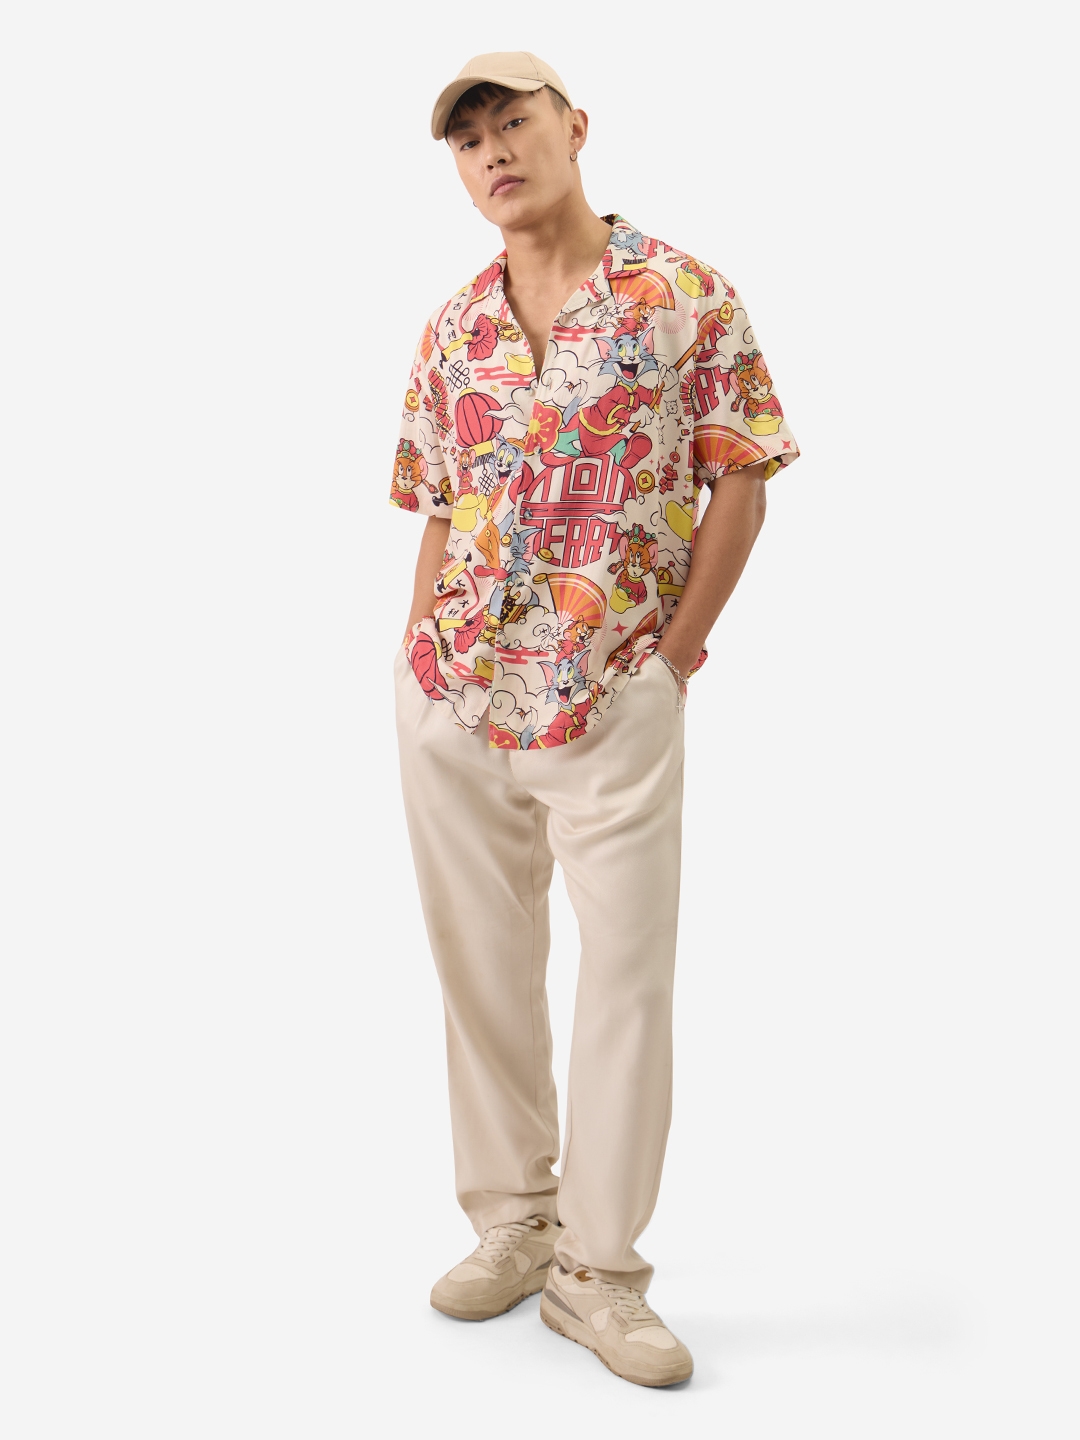 Men's Tom & Jerry New Year Printed Casual Shirt